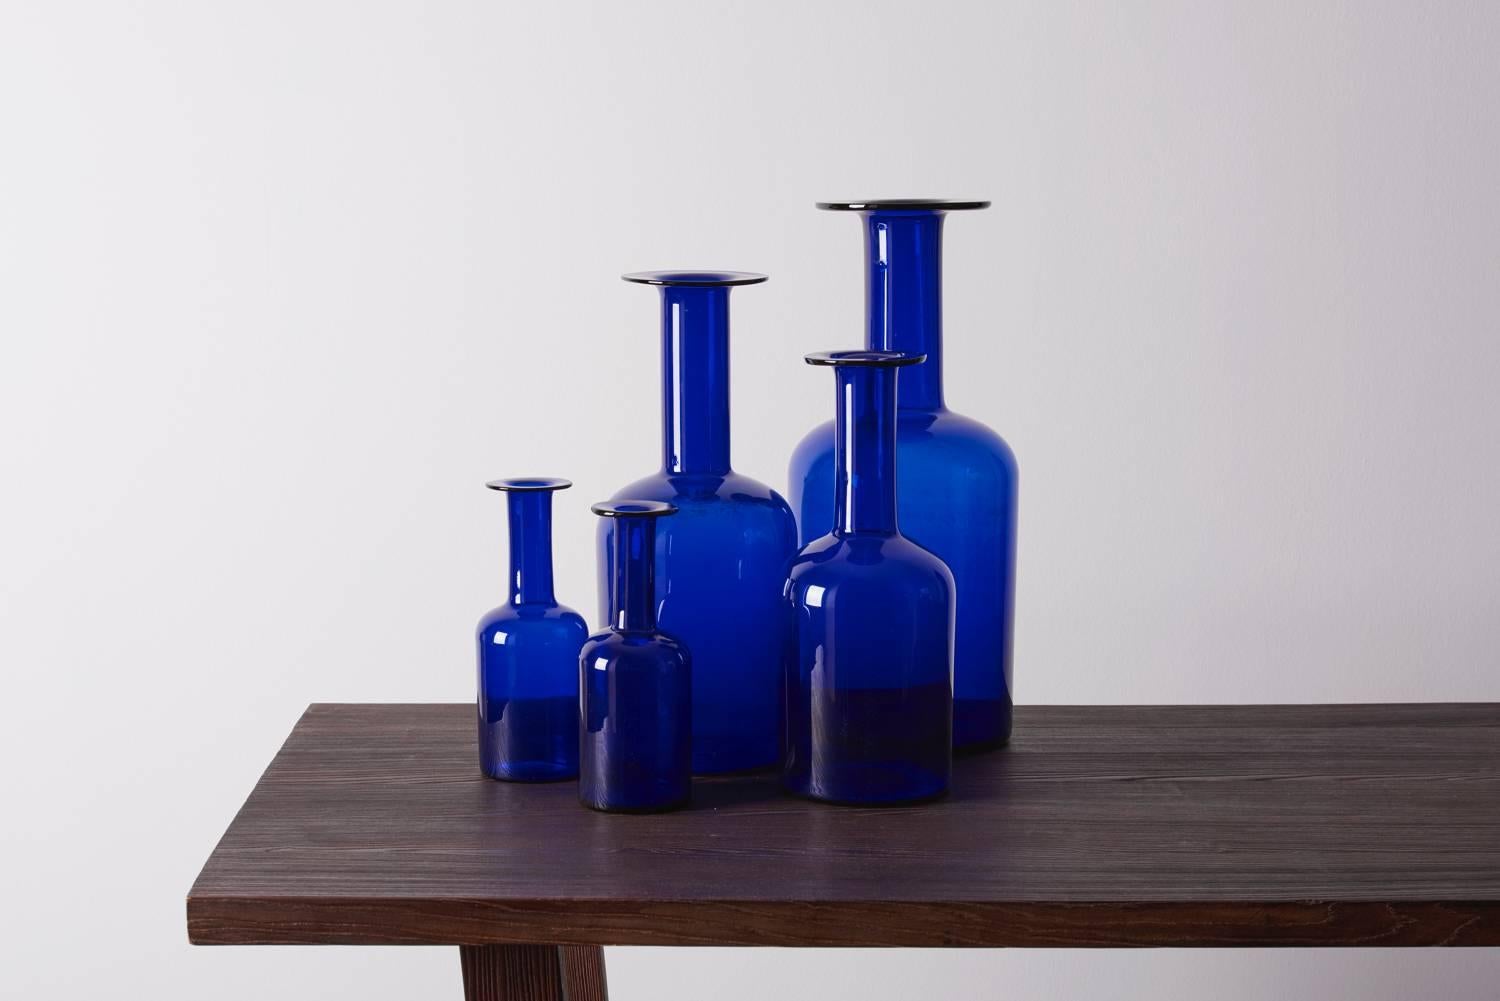 Set of five Holmegaard Gulv vases by Otto Brauer in blue
Here are measurements of the vases:
Two 25.5cm/ 10